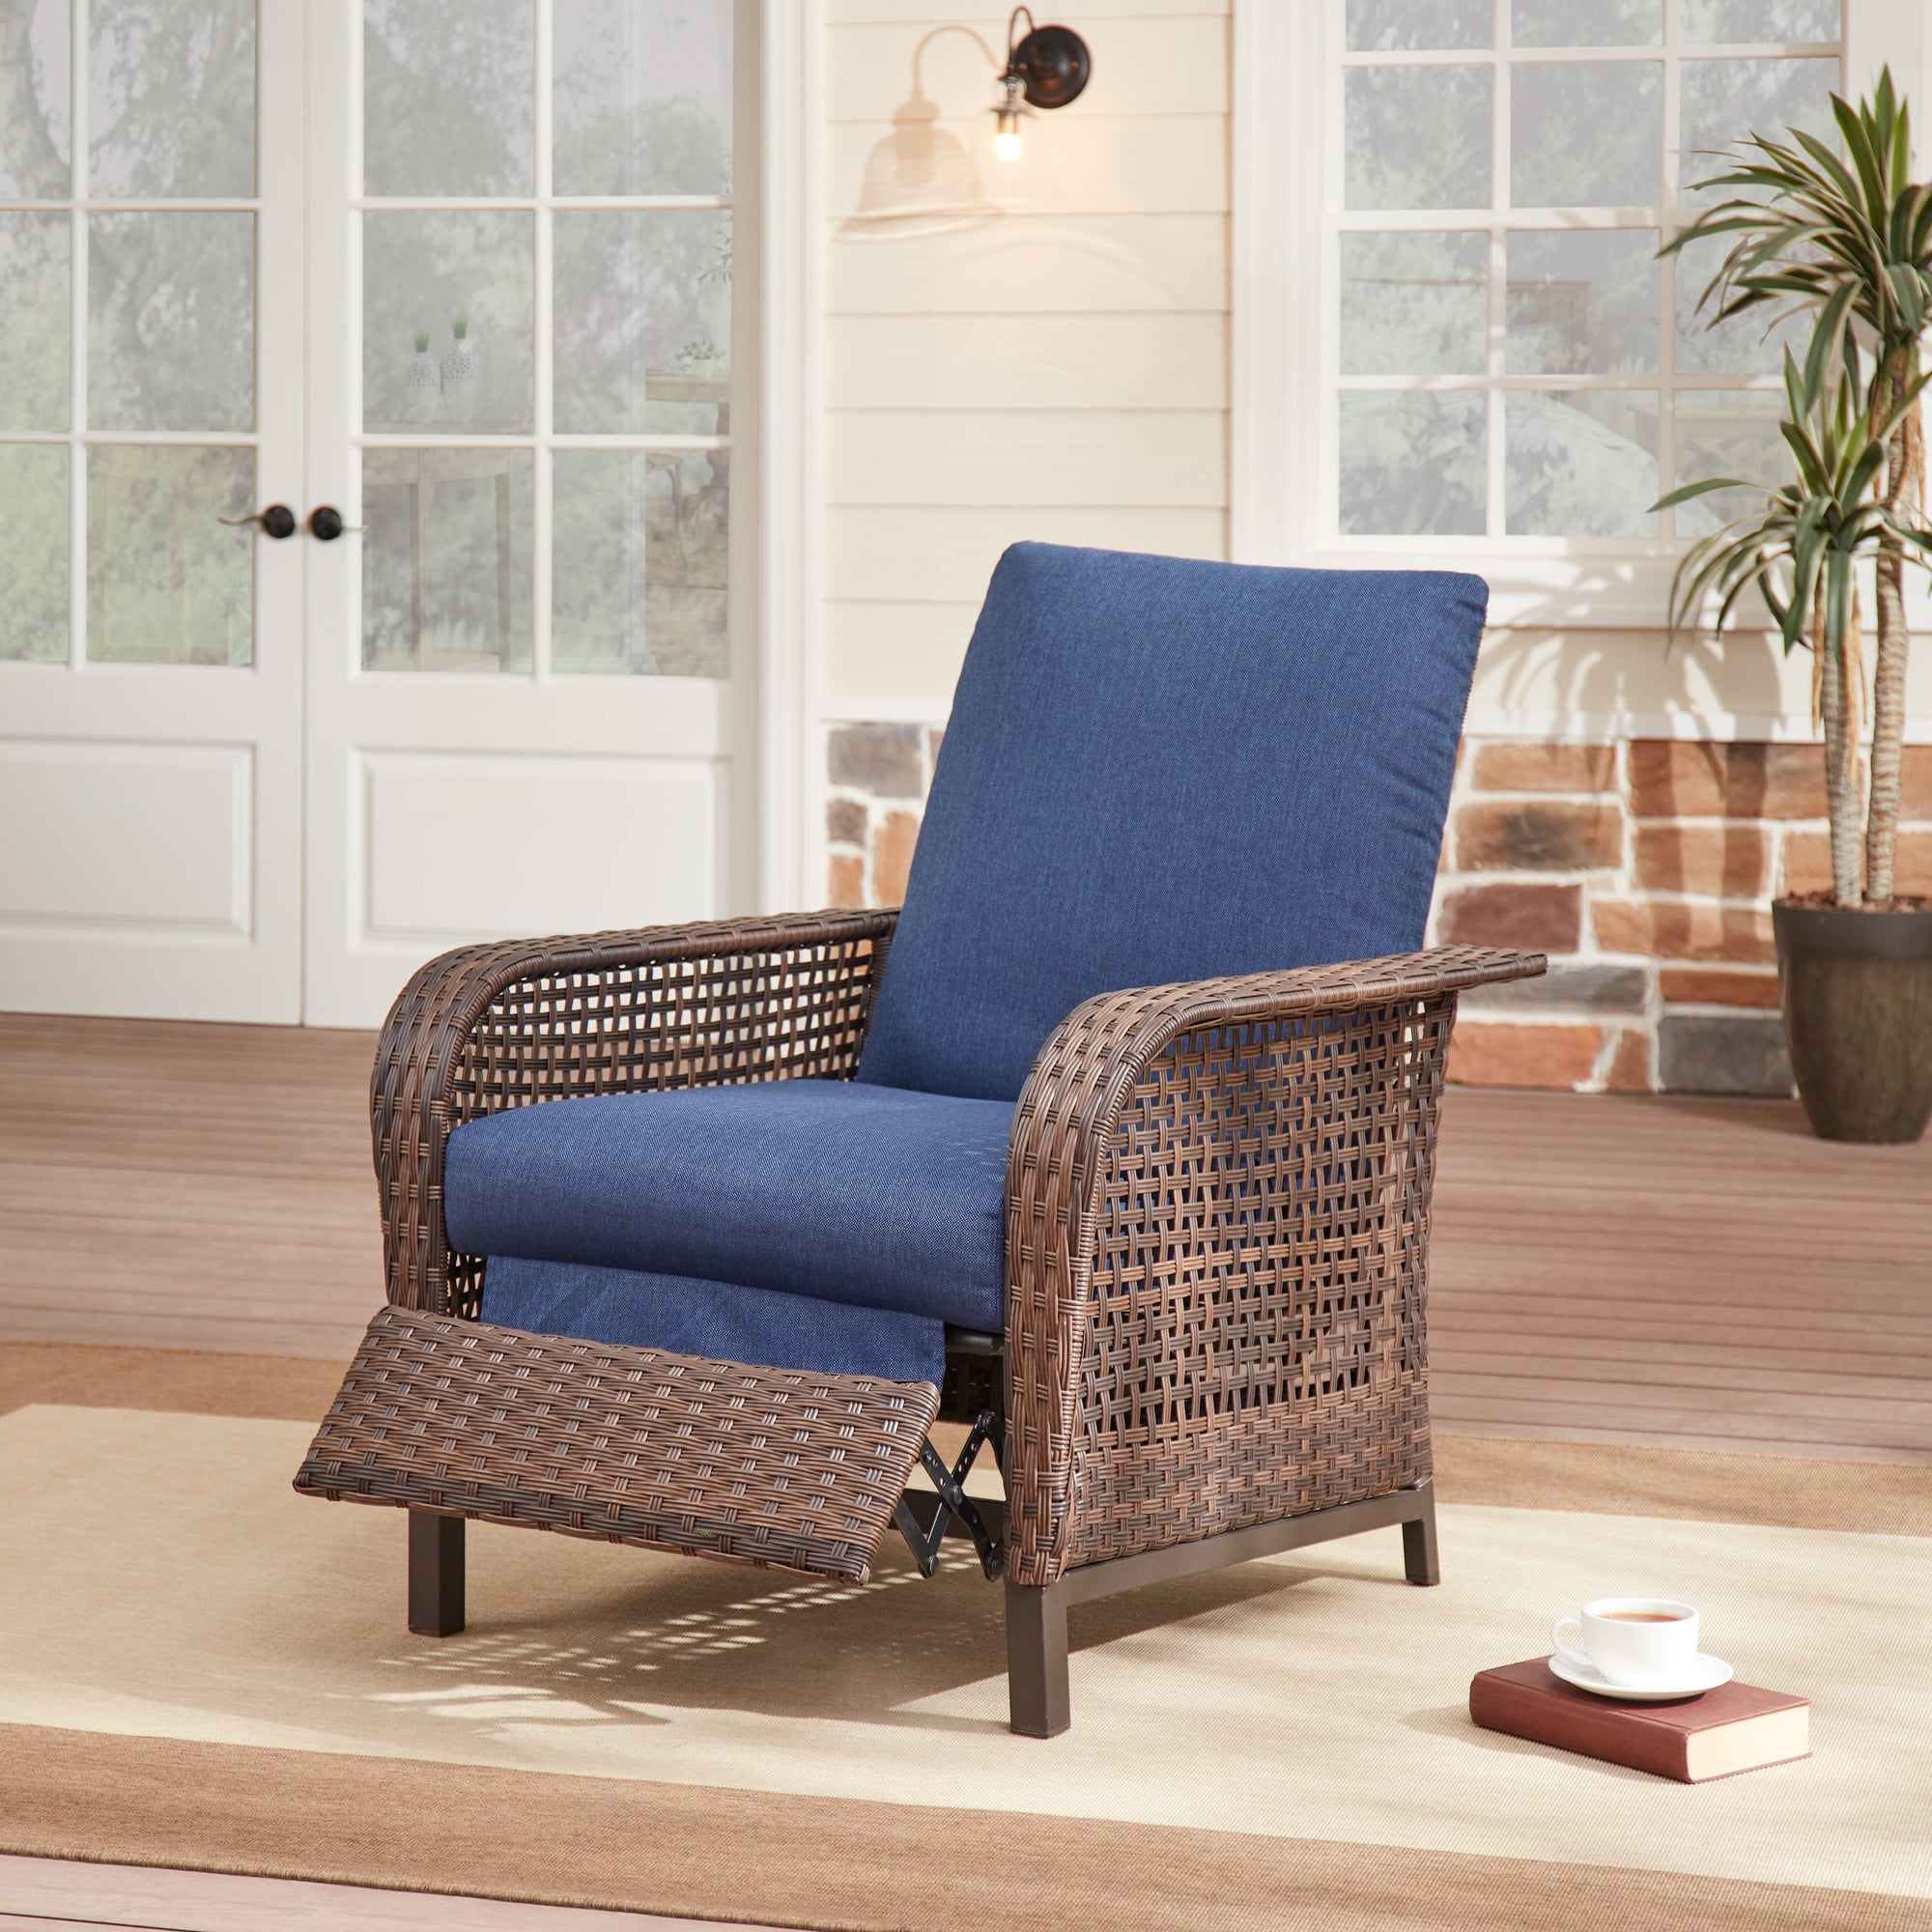 Mainstays Tuscany Ridge Outdoor Reclining Chair, Multiple Colors